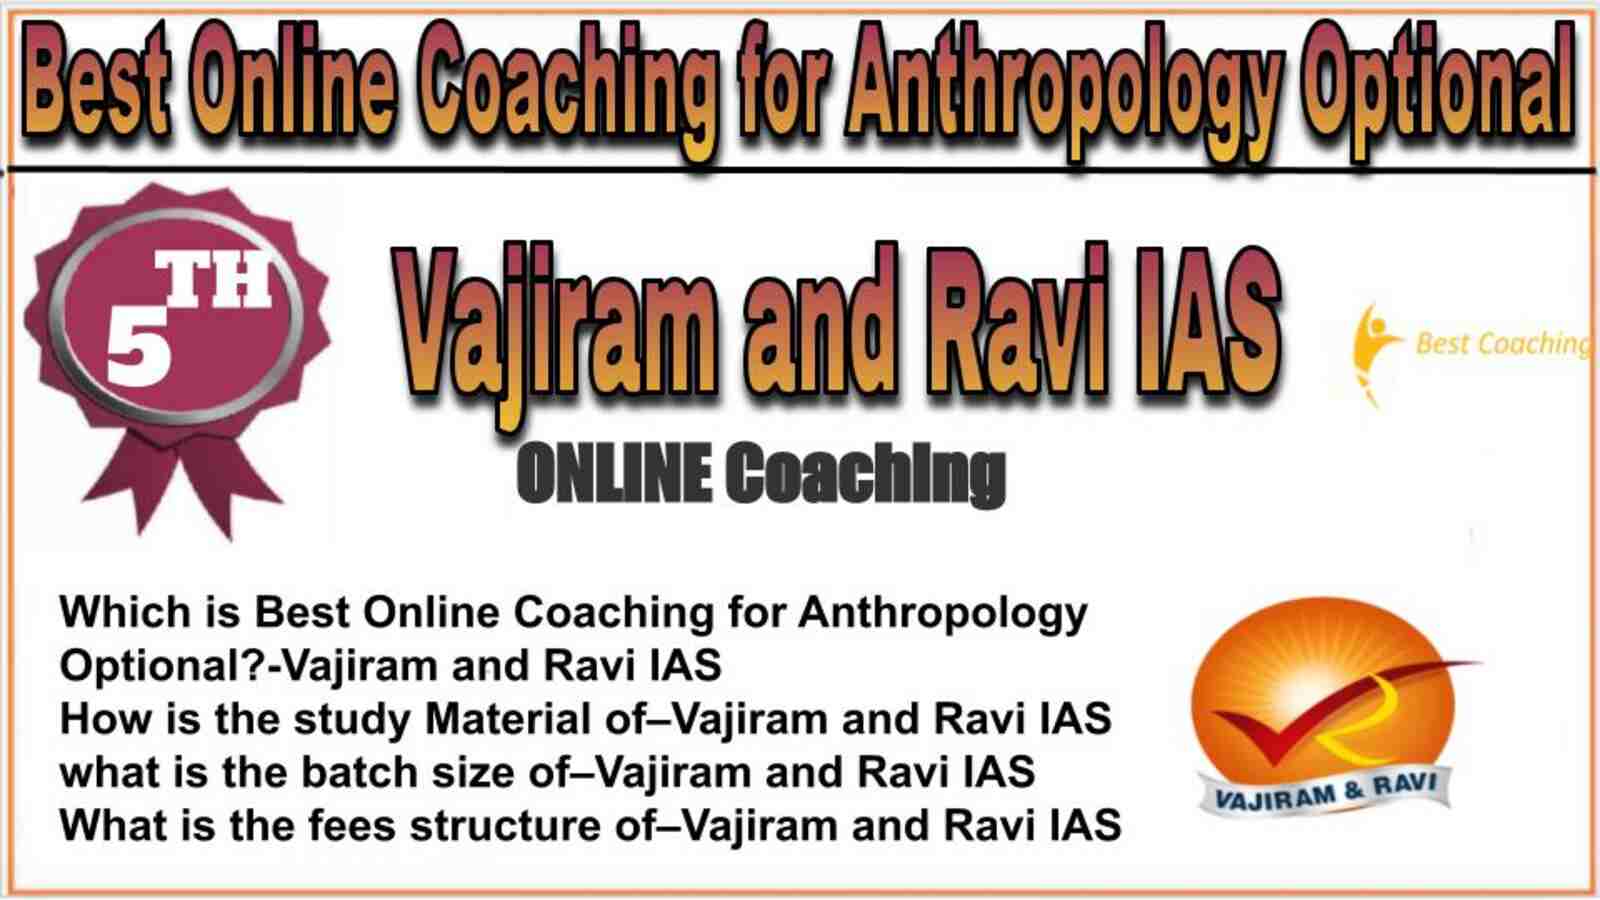 Rank 5 best online coaching for Anthropology Optional